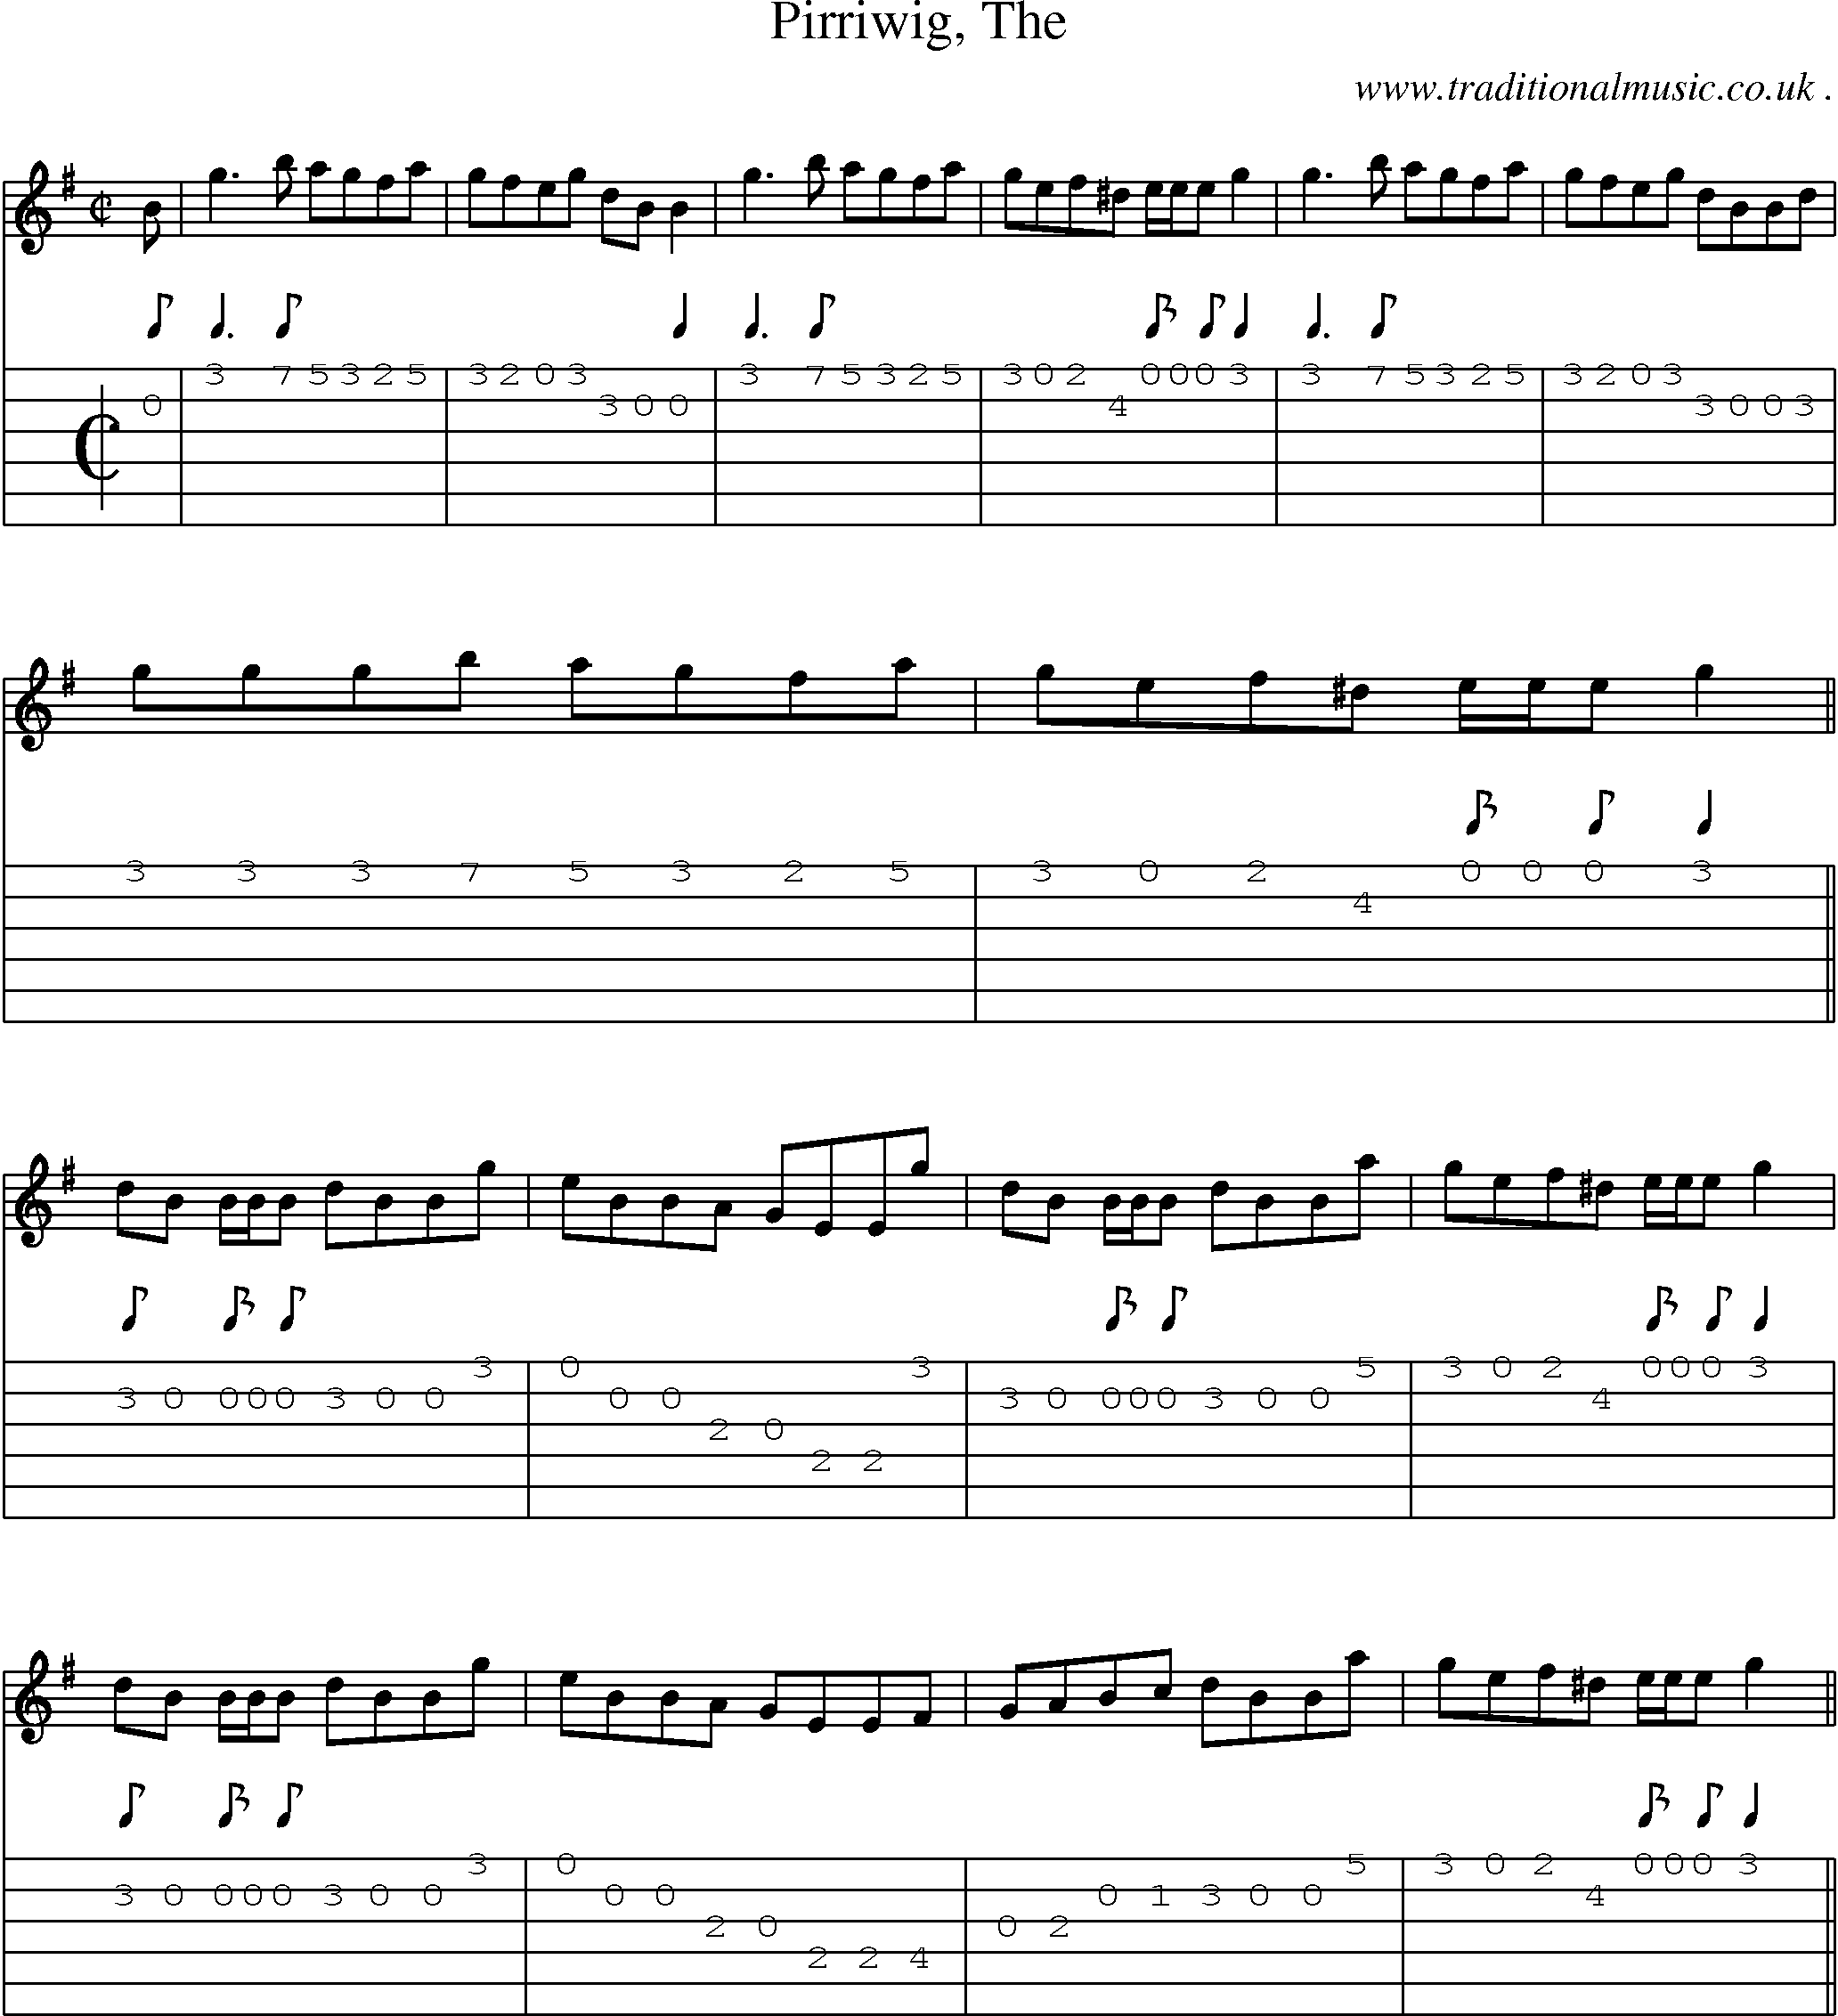 Sheet-music  score, Chords and Guitar Tabs for Pirriwig The